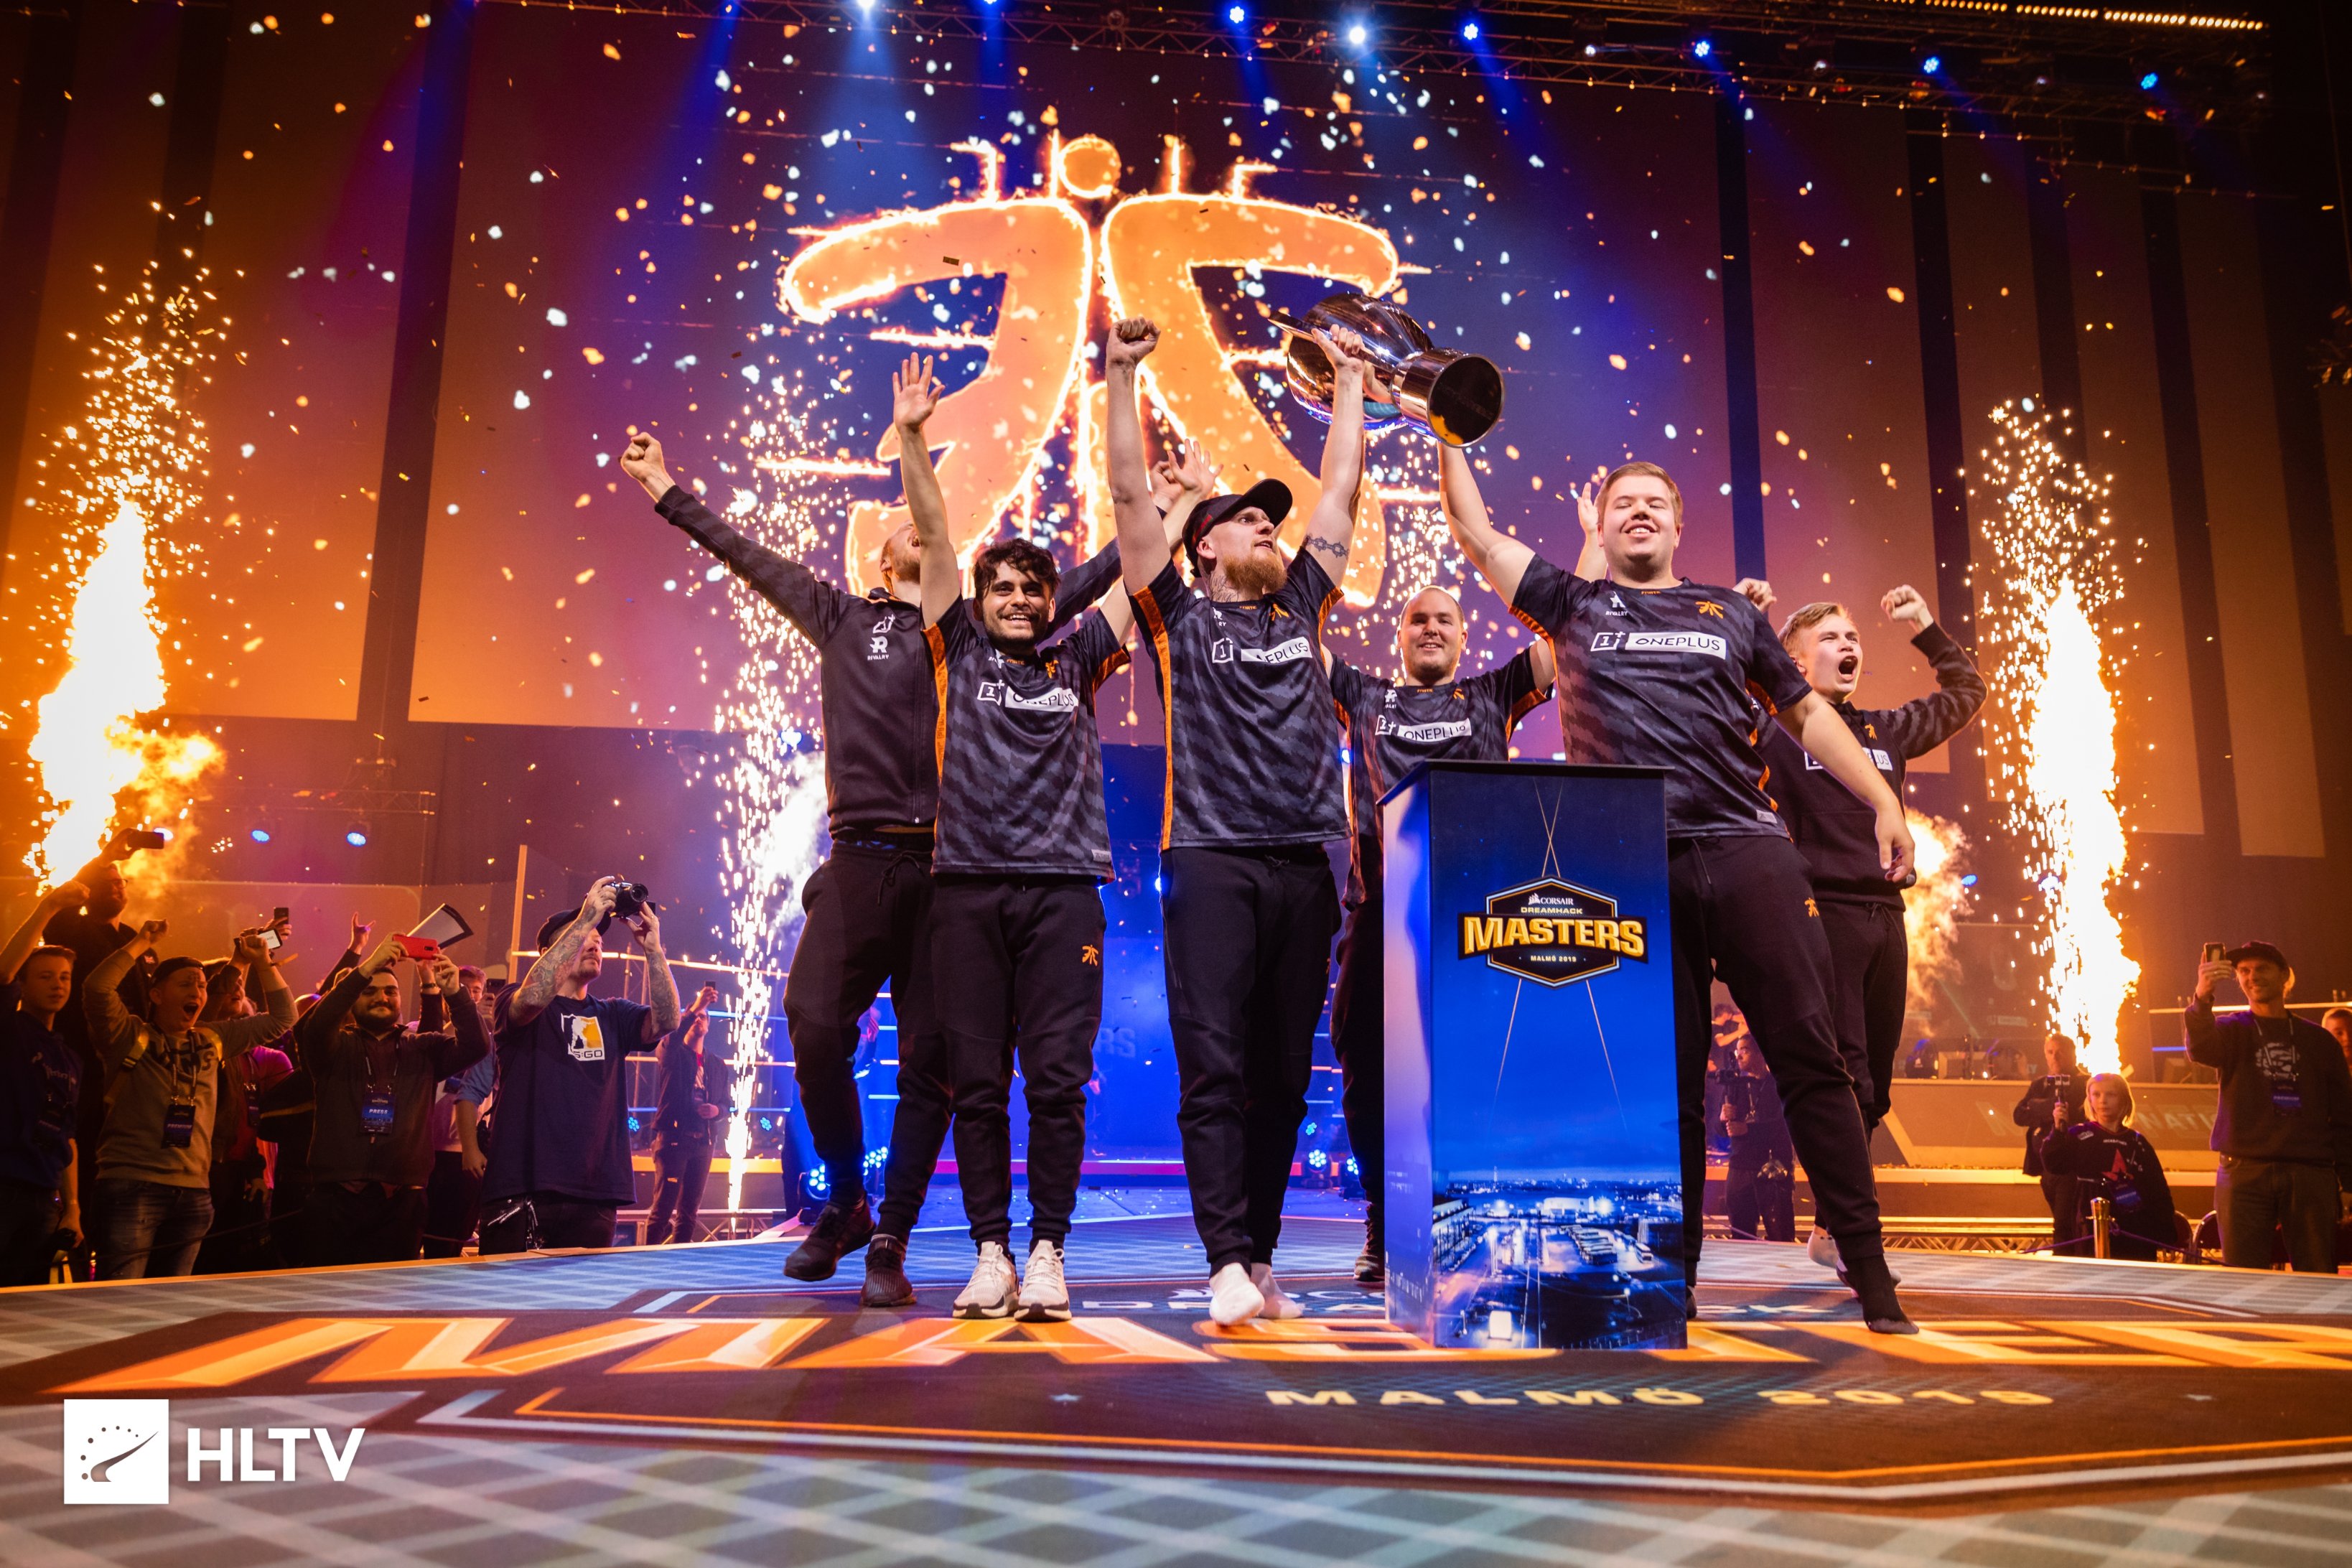 træt af illoyalitet pels HLTV.org on Twitter: "The DreamHack Masters Malmö 2019 Champions, @FNATIC  #DHMasters https://t.co/2B9UrNoIJw" / Twitter